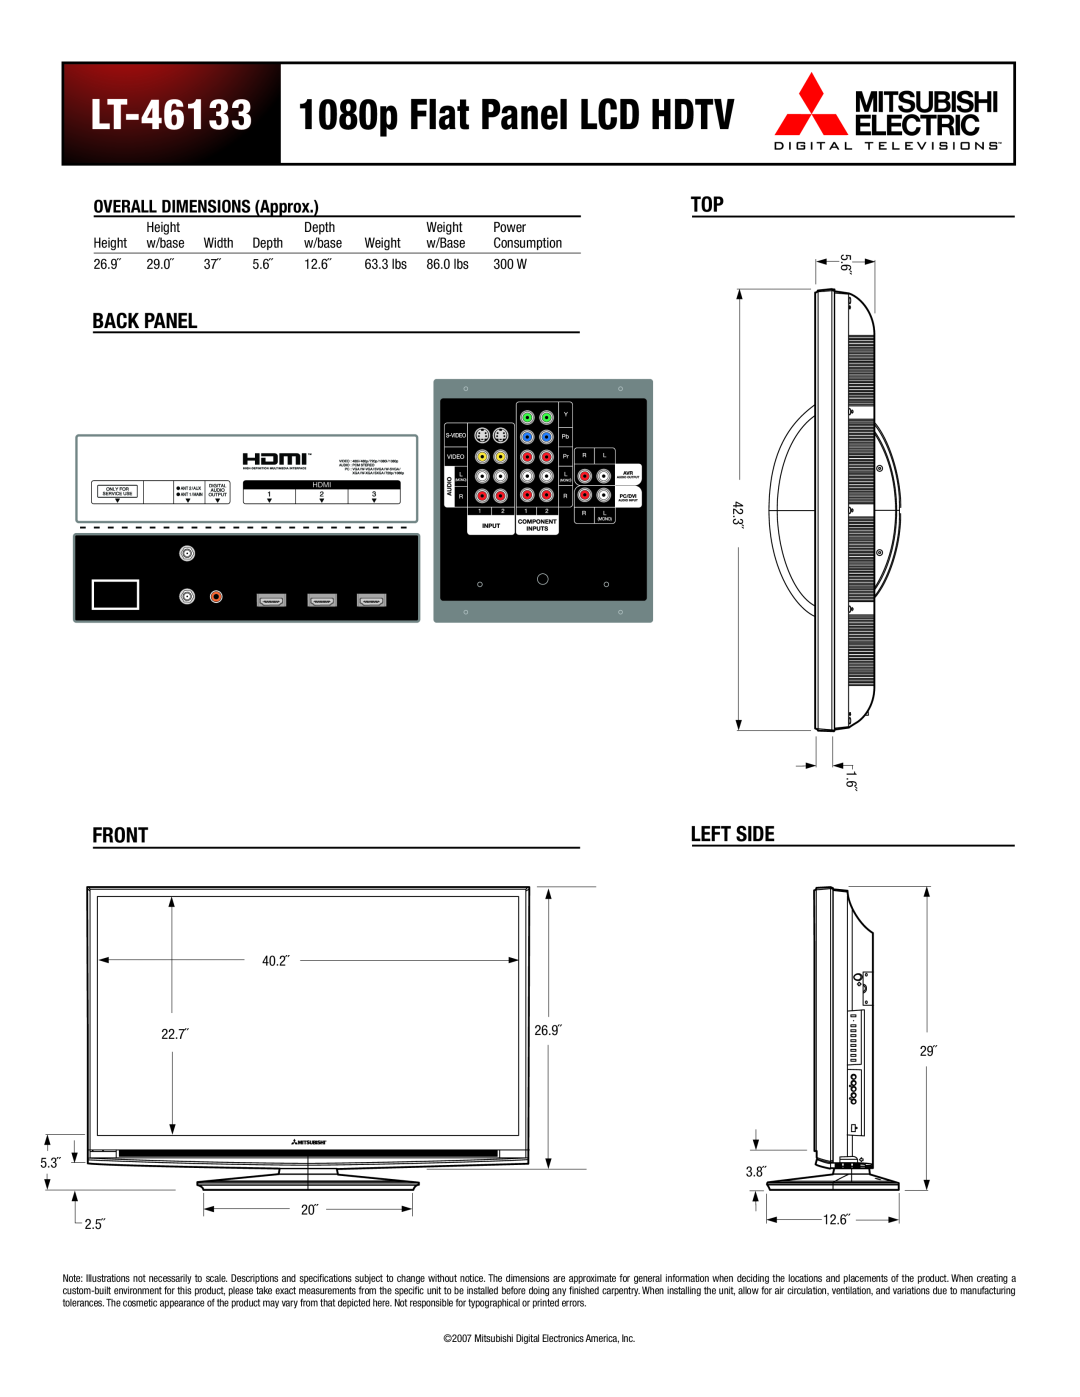 Mitsubishi Electronics dimensions LT-46133 1080p Flat Panel LCD HDTV, OVERALL DIMENSIONS Approx, Back Panel, Front 